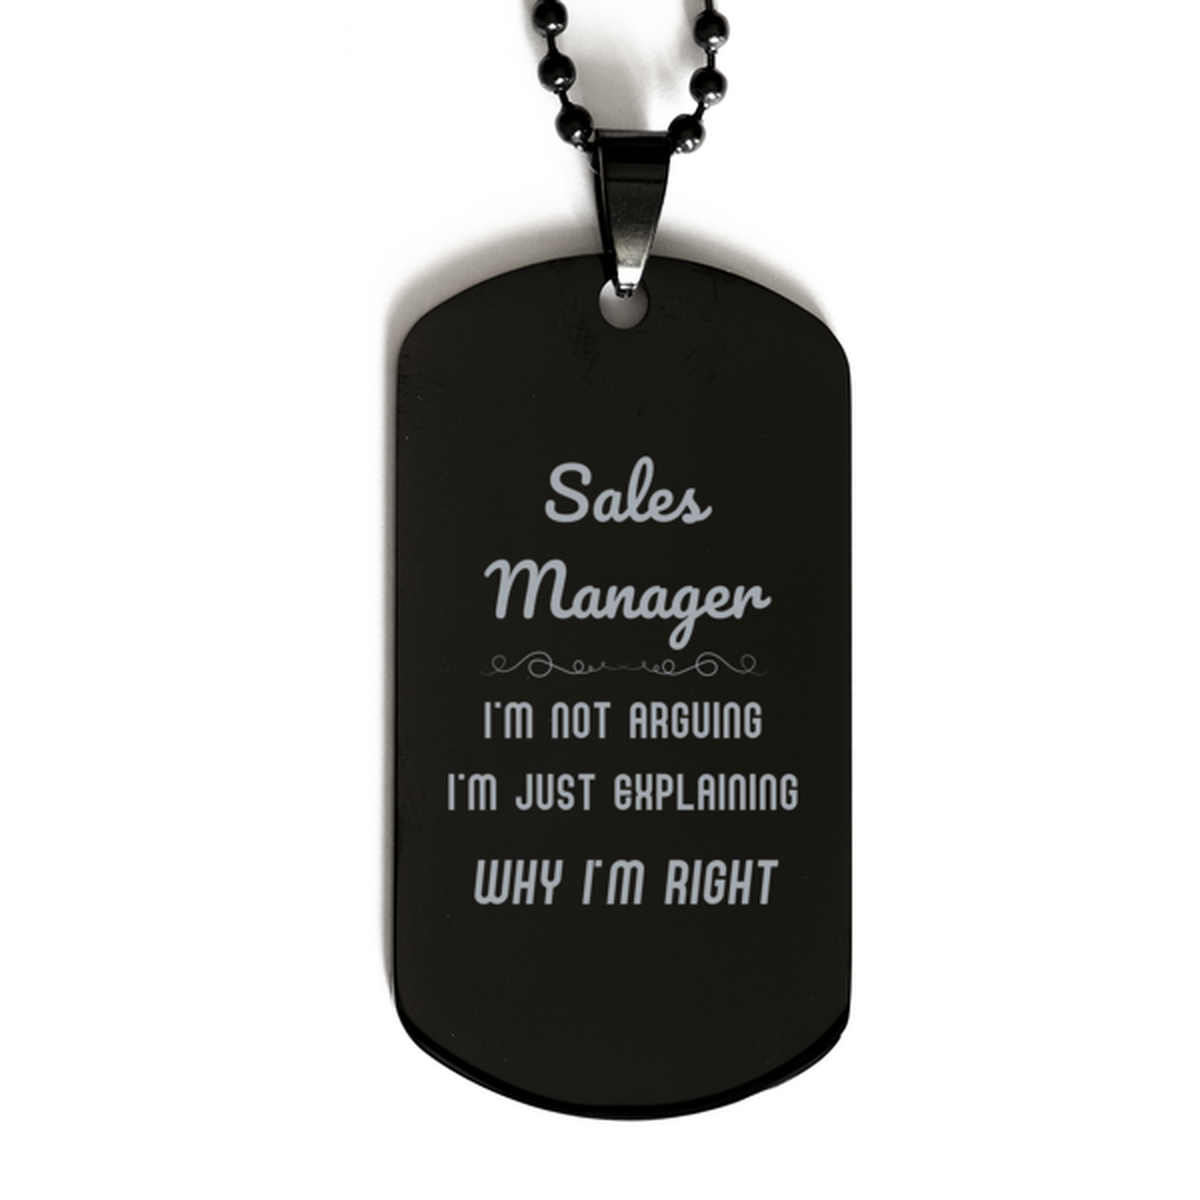 Sales Manager I'm not Arguing. I'm Just Explaining Why I'm RIGHT Black Dog Tag, Funny Saying Quote Sales Manager Gifts For Sales Manager Graduation Birthday Christmas Gifts for Men Women Coworker